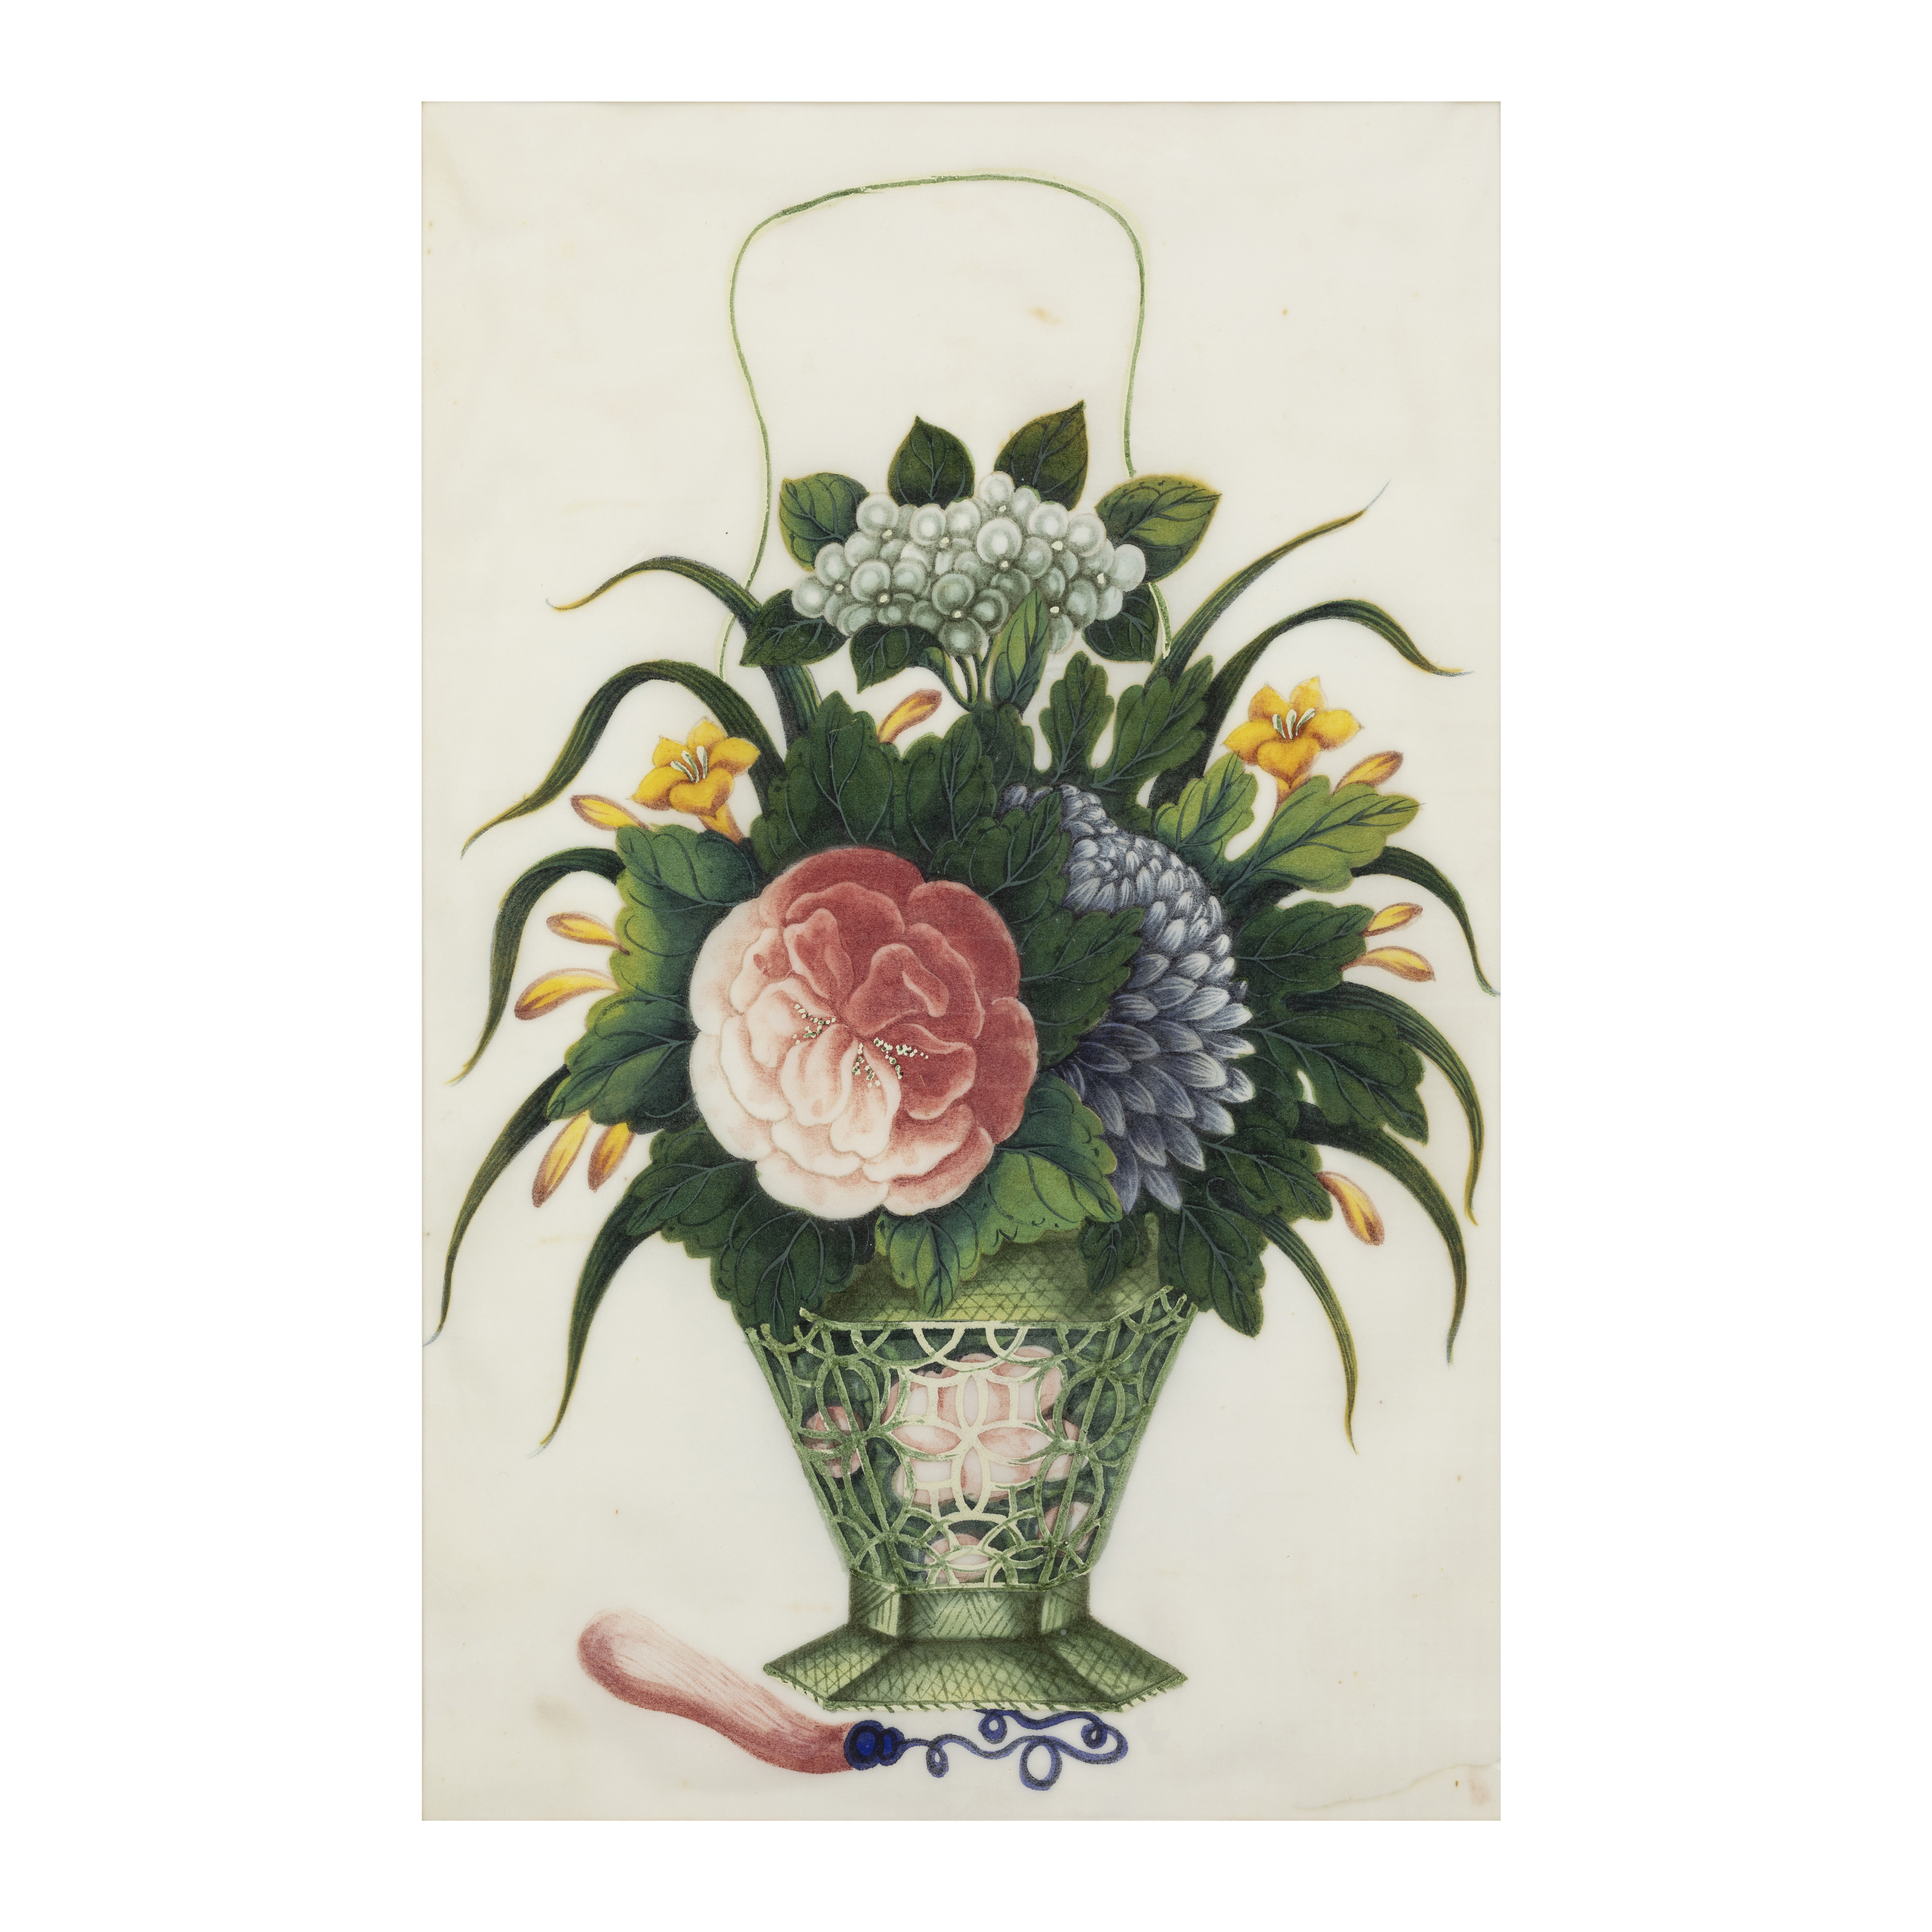 Chinese Guangdong (Canton) Export School, 19th century 'Baskets of flowers' Gouache on pith pap... - Image 3 of 3